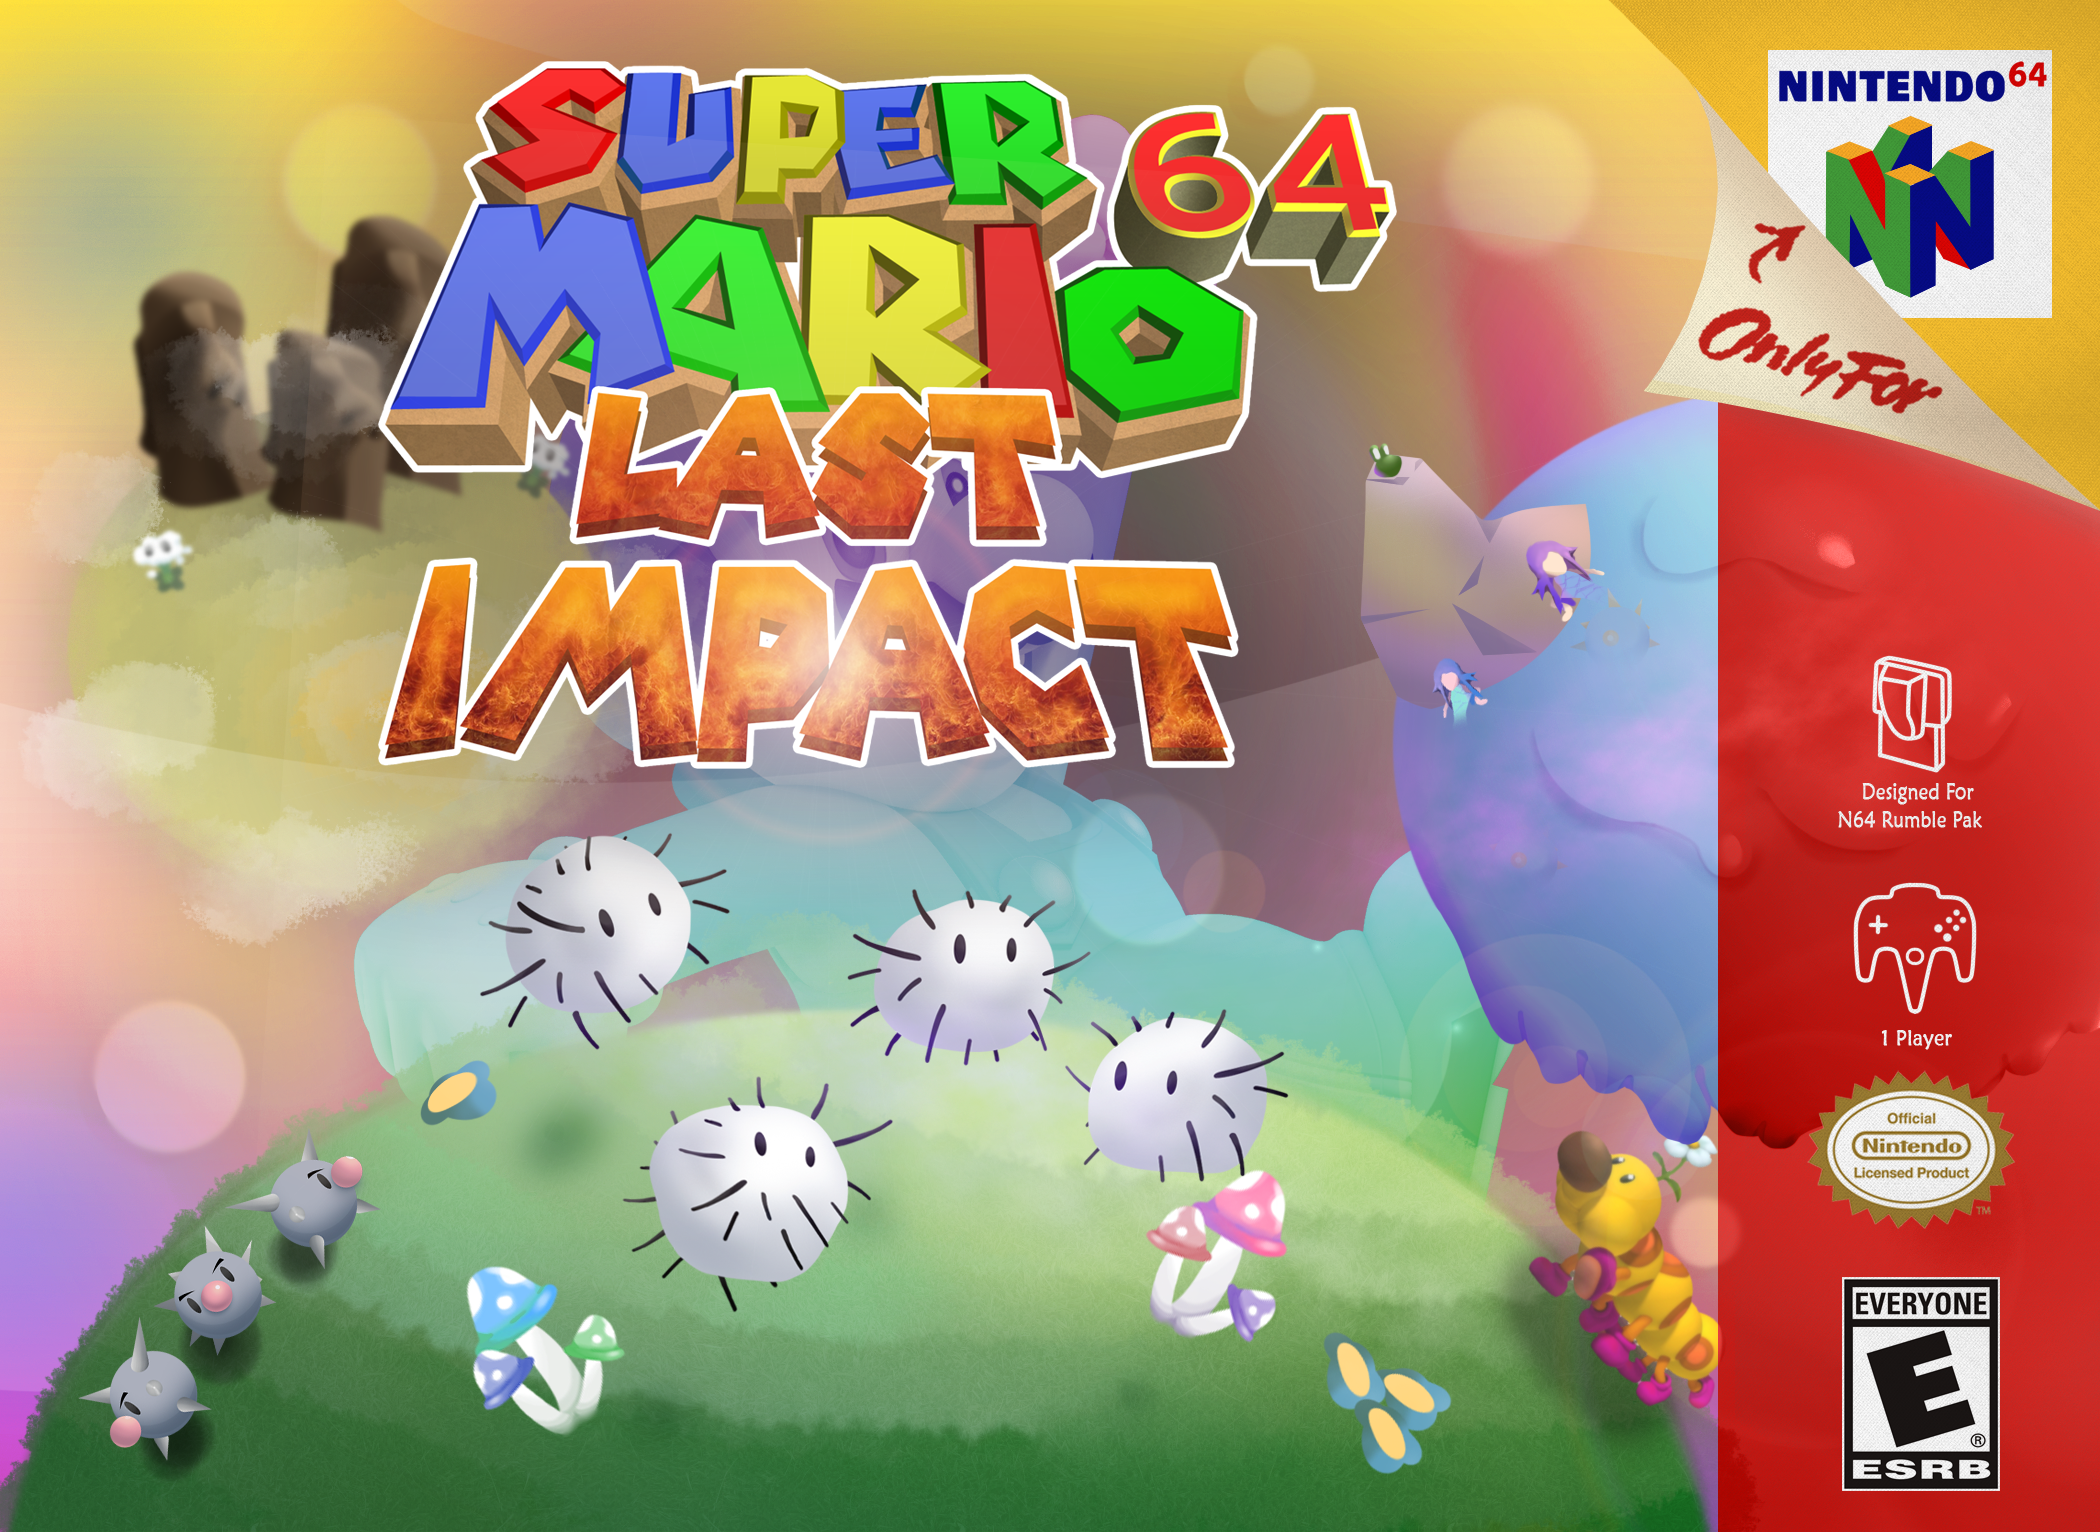 super-mario-64-last-impact-cartridge-the-first-is-that-because-the